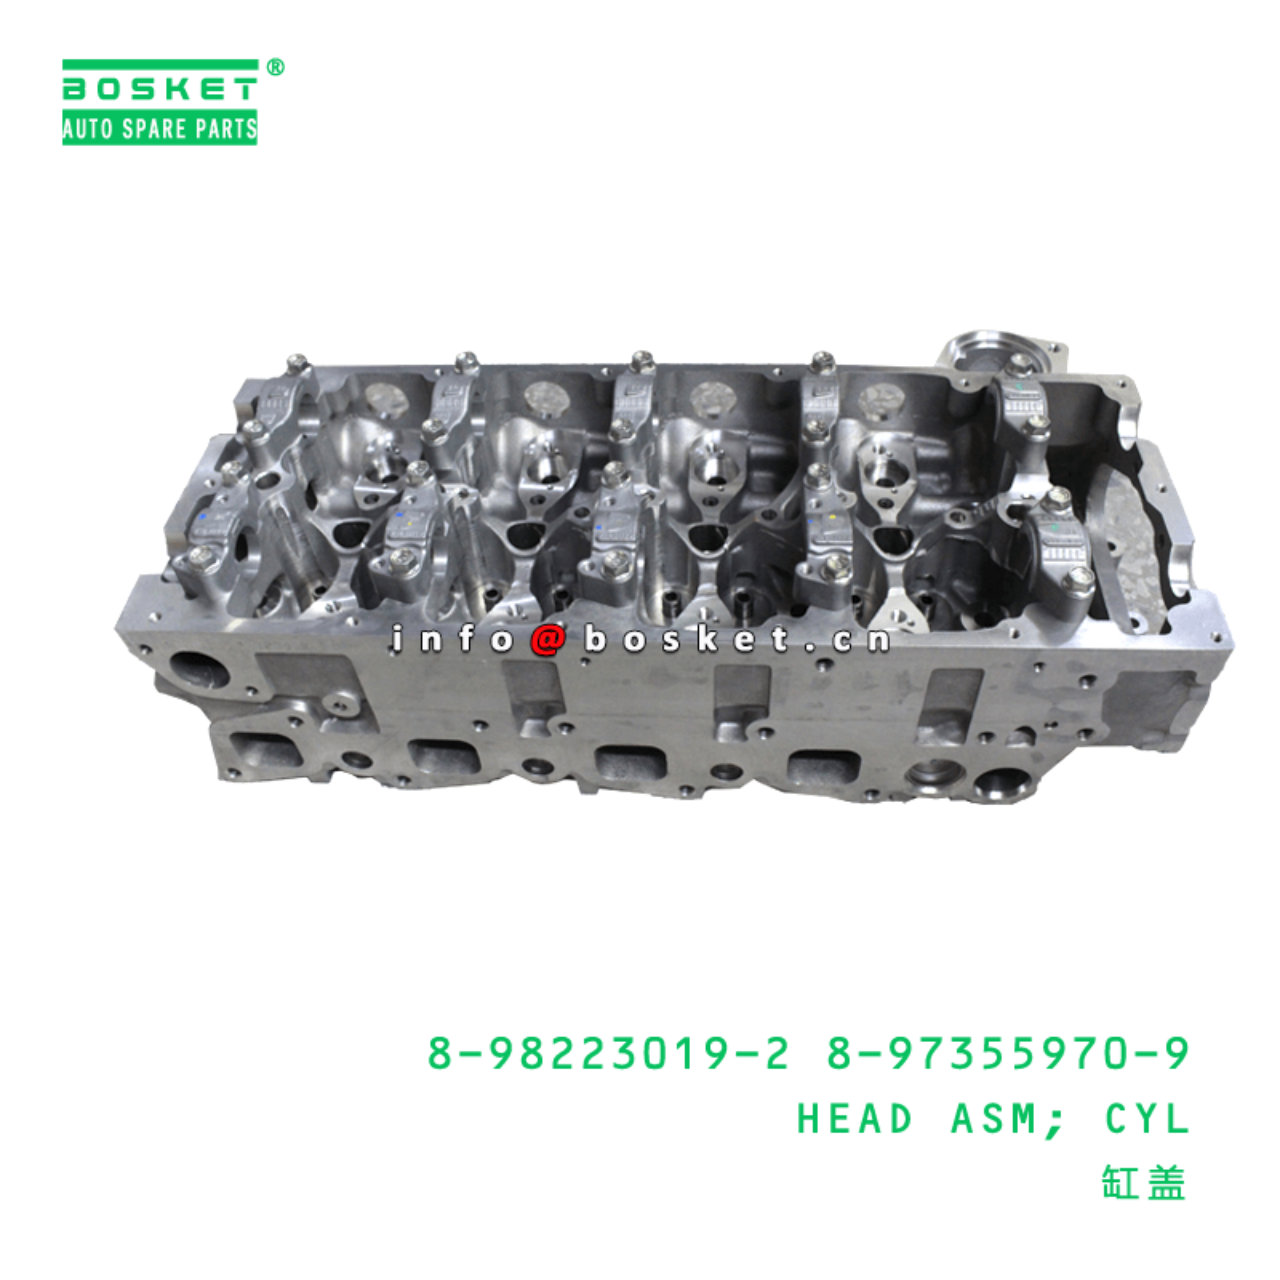 8-98223019-2 8-97355970-9 Cylinder Head Assembly 8982230192 8973559709 Suitable for ISUZU TFR 4JJ1-T